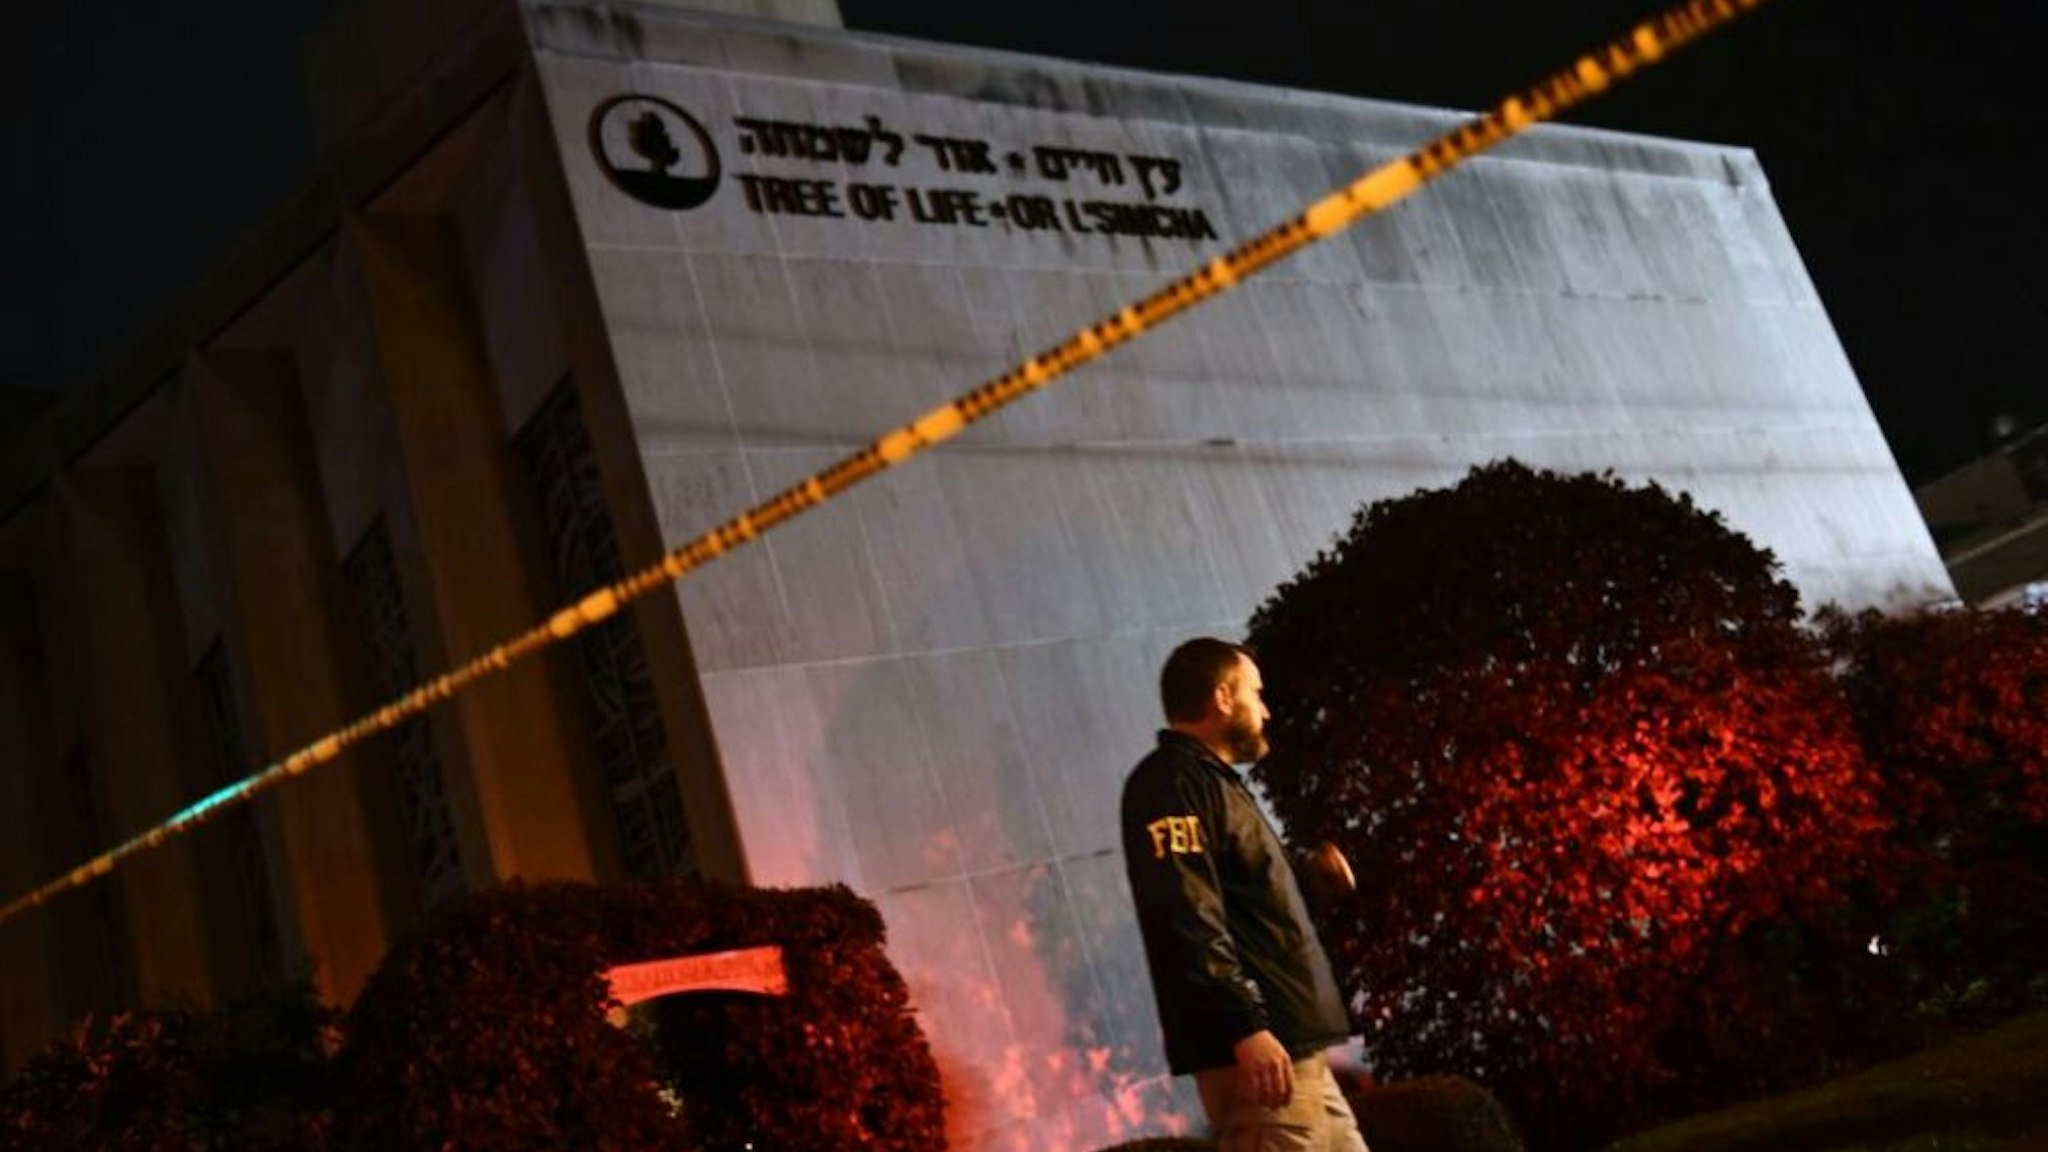 TOPSHOT - An FBI agent stands behind a police cordon outside the Tree of Life Synagogue after a shooting there left 11 people dead in the Squirrel Hill neighborhood of Pittsburgh on October 27, 2018. - A heavily armed gunman opened fire during a baby-naming ceremony at a synagogue in the US city of Pittsburgh on October 27, killing 11 people and injuring six in the deadliest anti-Semitic attack in recent American history.